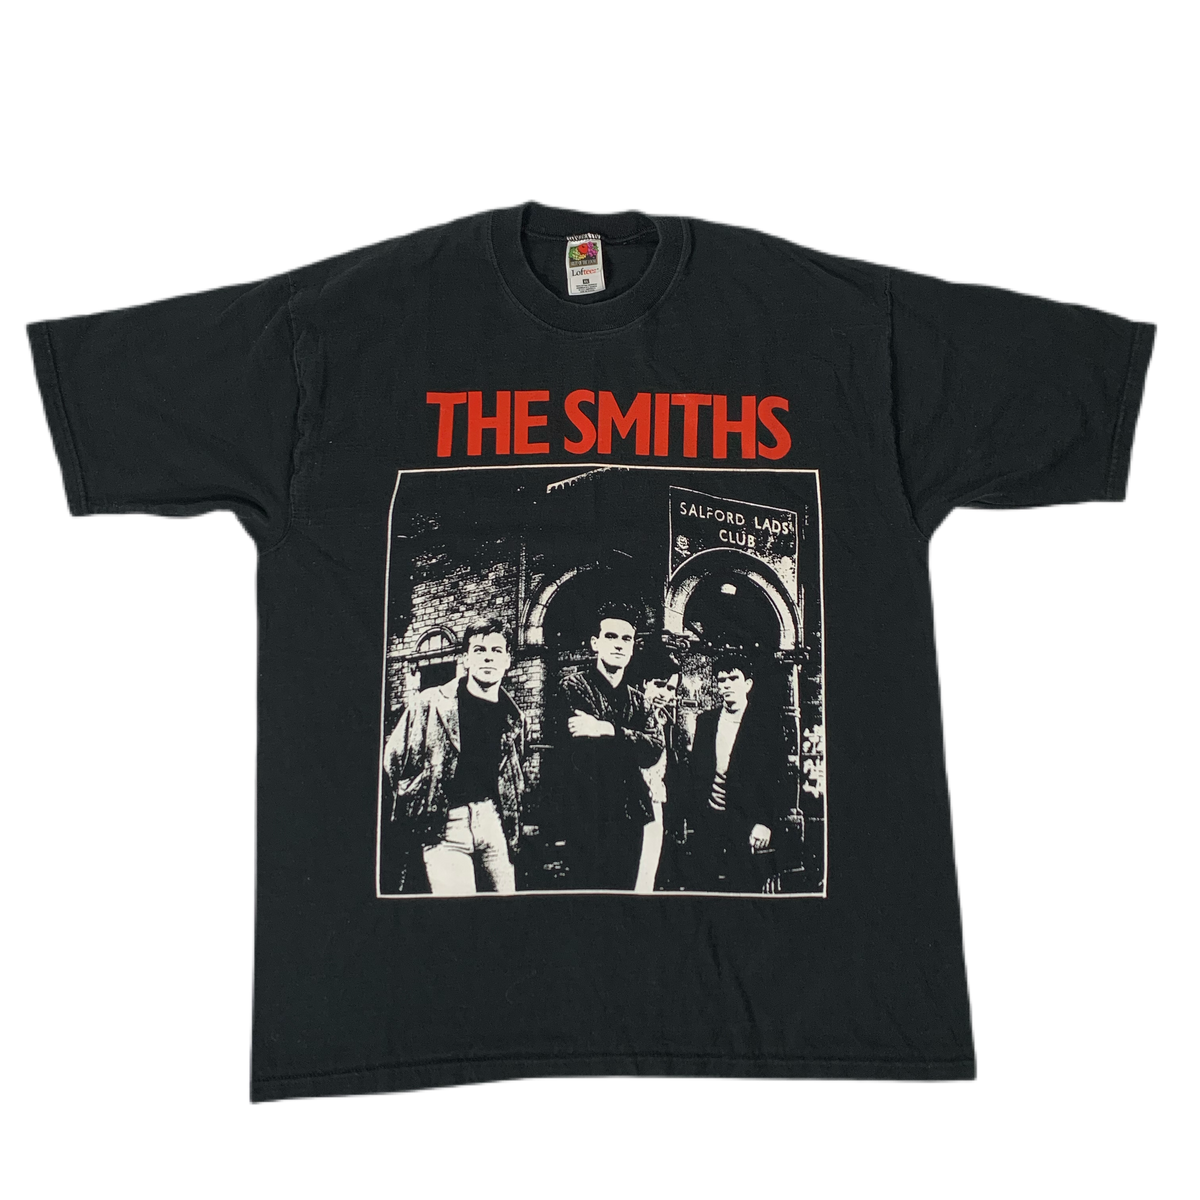 Vintage The Smiths “Salford Lads Club” T-Shirt